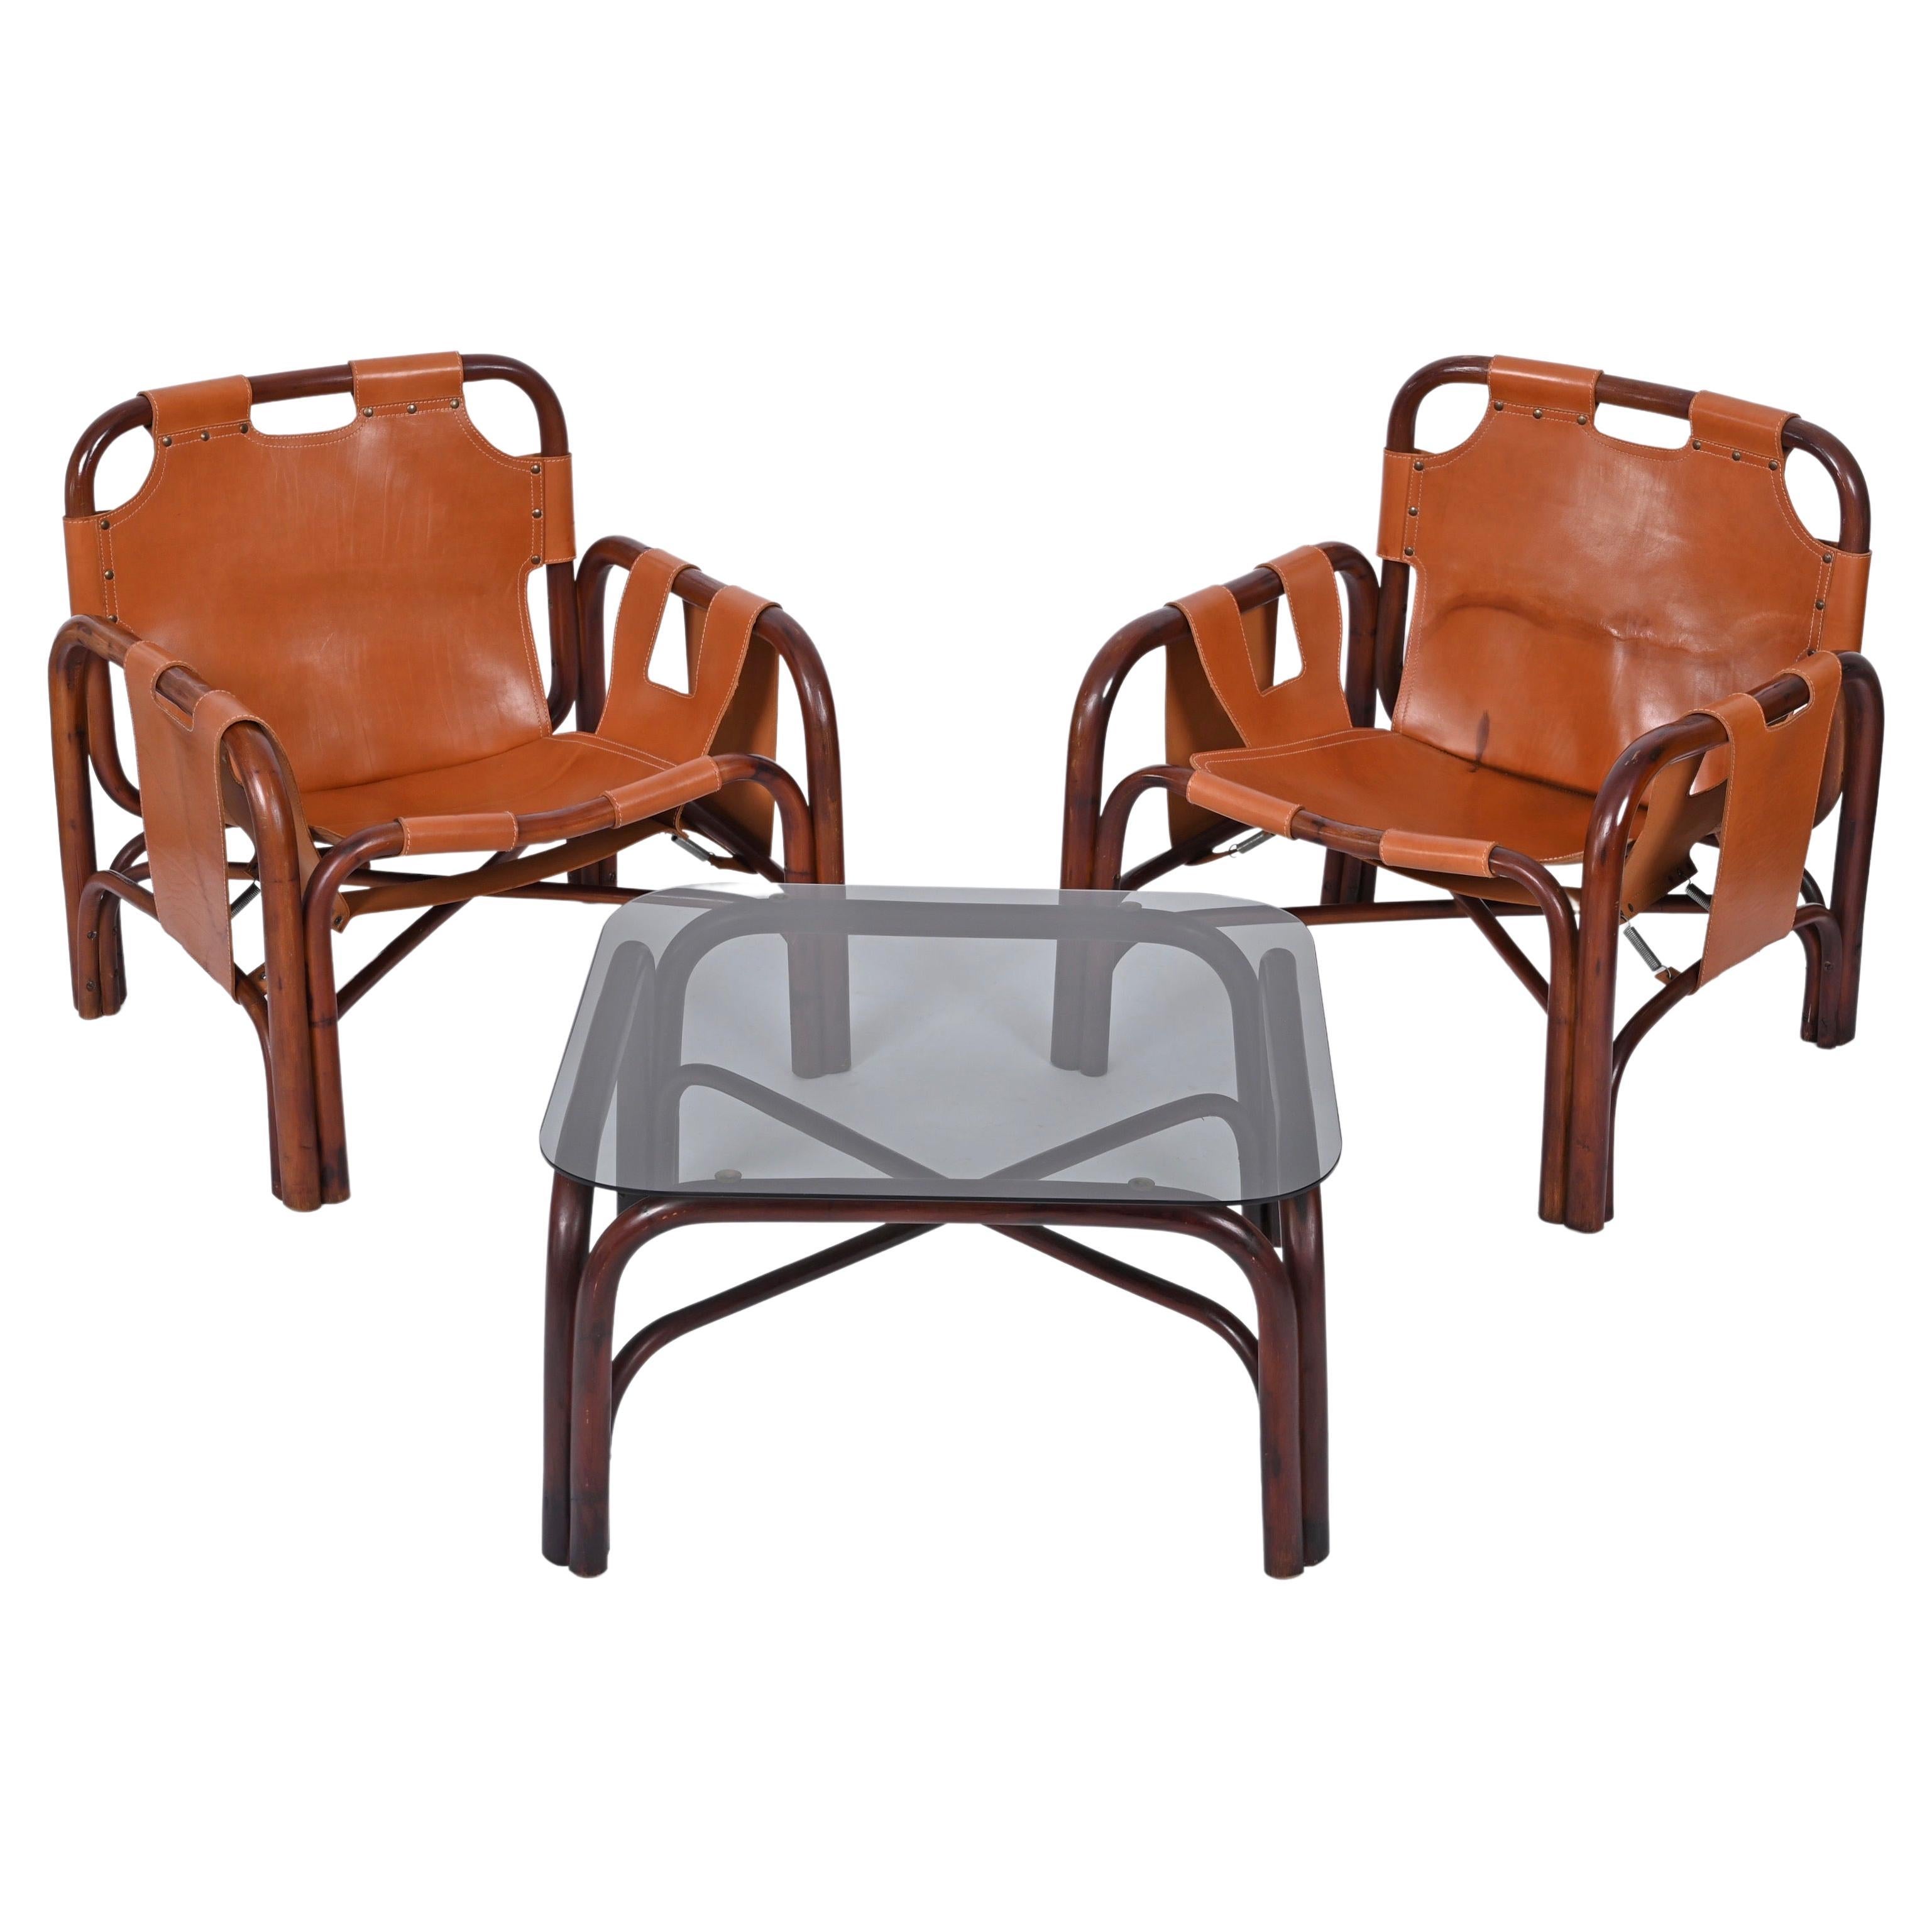 Set of Midcentury Pair of Bamboo and Leather Italian Armchairs and Table, 1960s